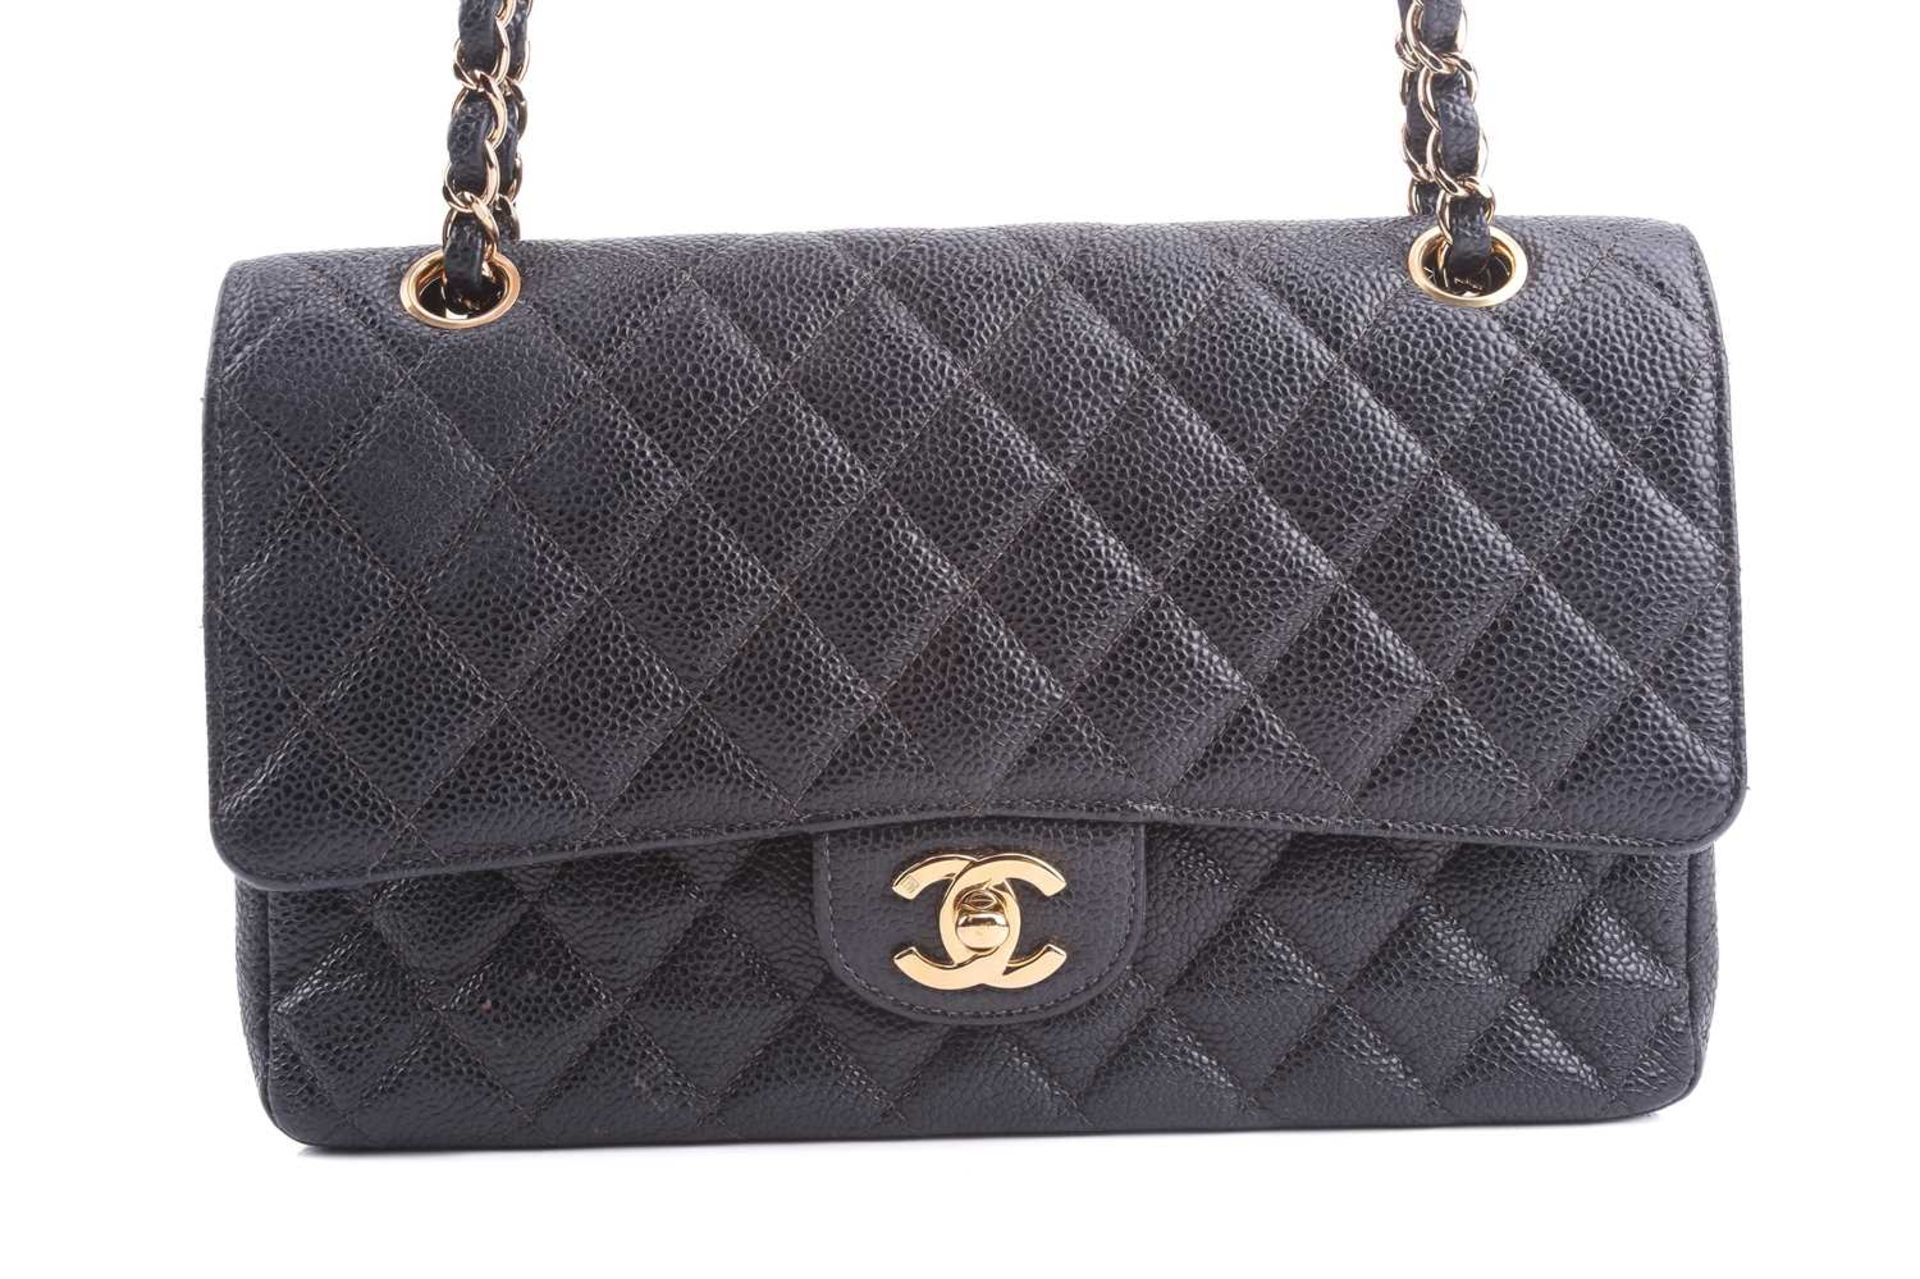 Chanel - a medium classic double flap bag in black diamond-quilted caviar leather, circa 2003, - Image 4 of 11